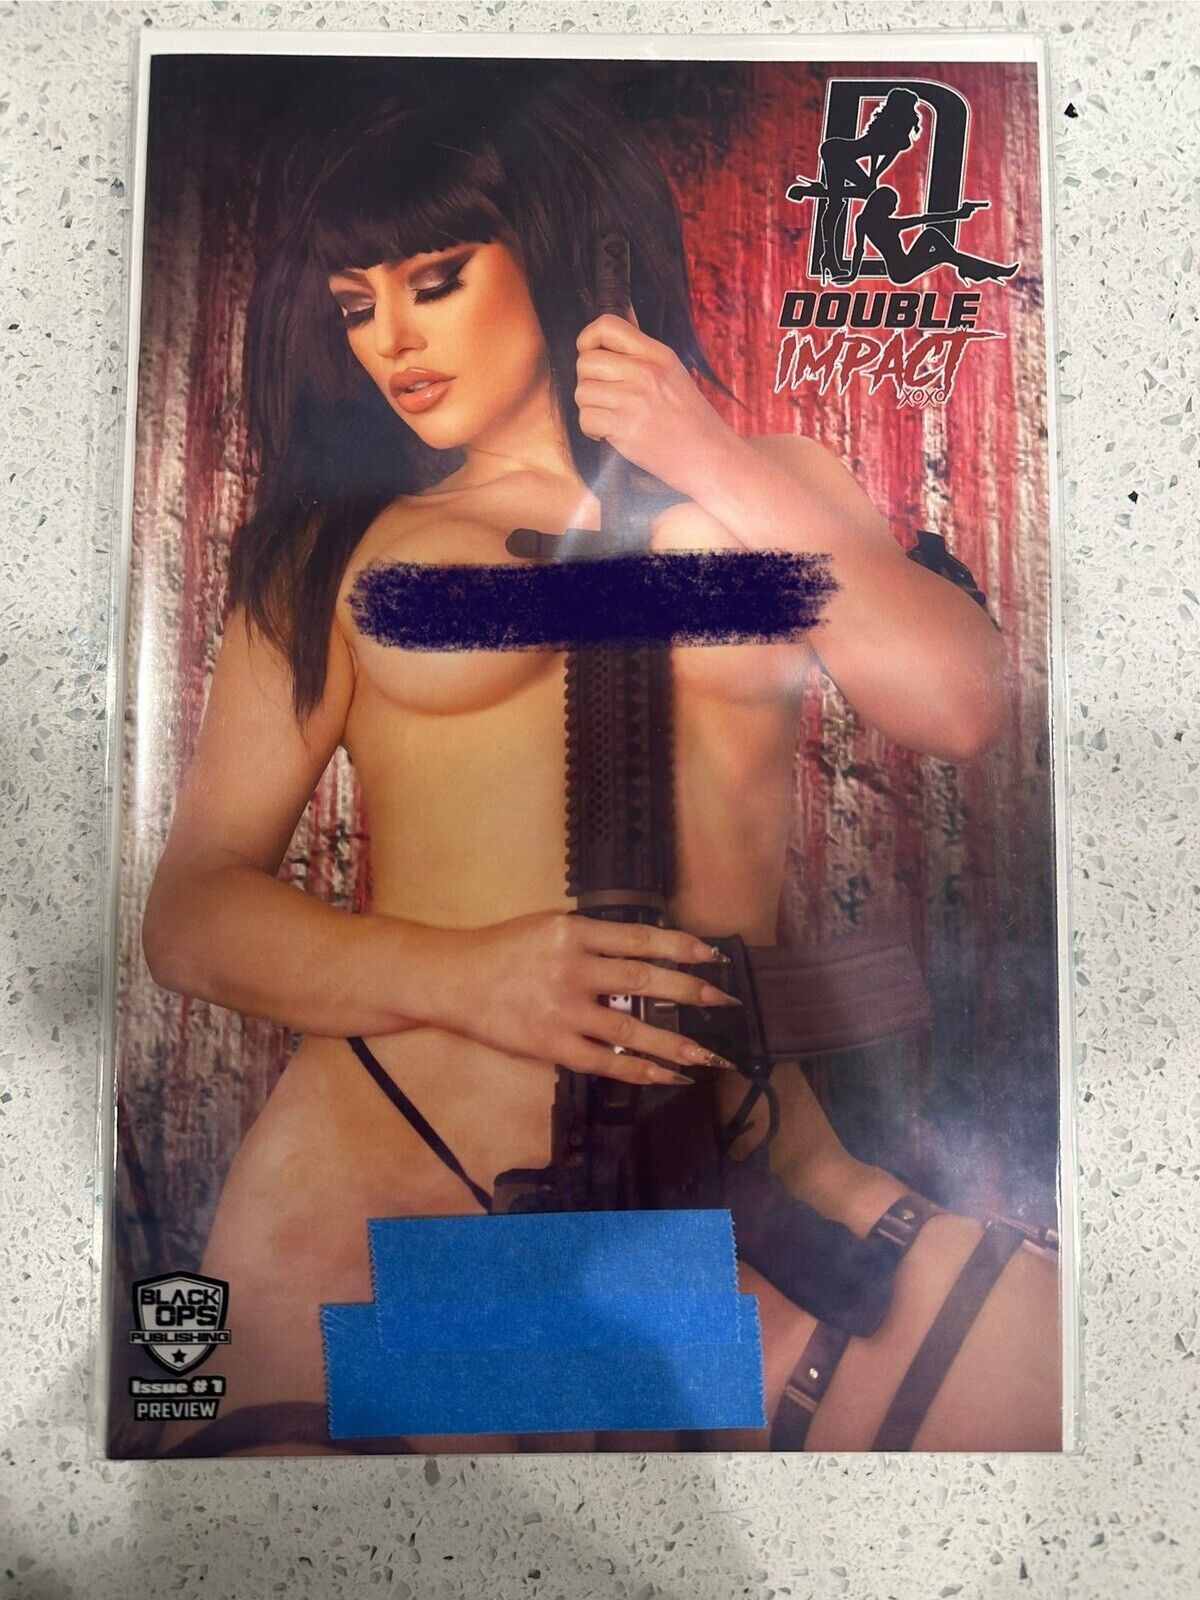 DOUBLE IMPACT #1 - RACHIE GUN GIRL COSPLAY TOPLESS COVER LIMITED TO ONLY 50